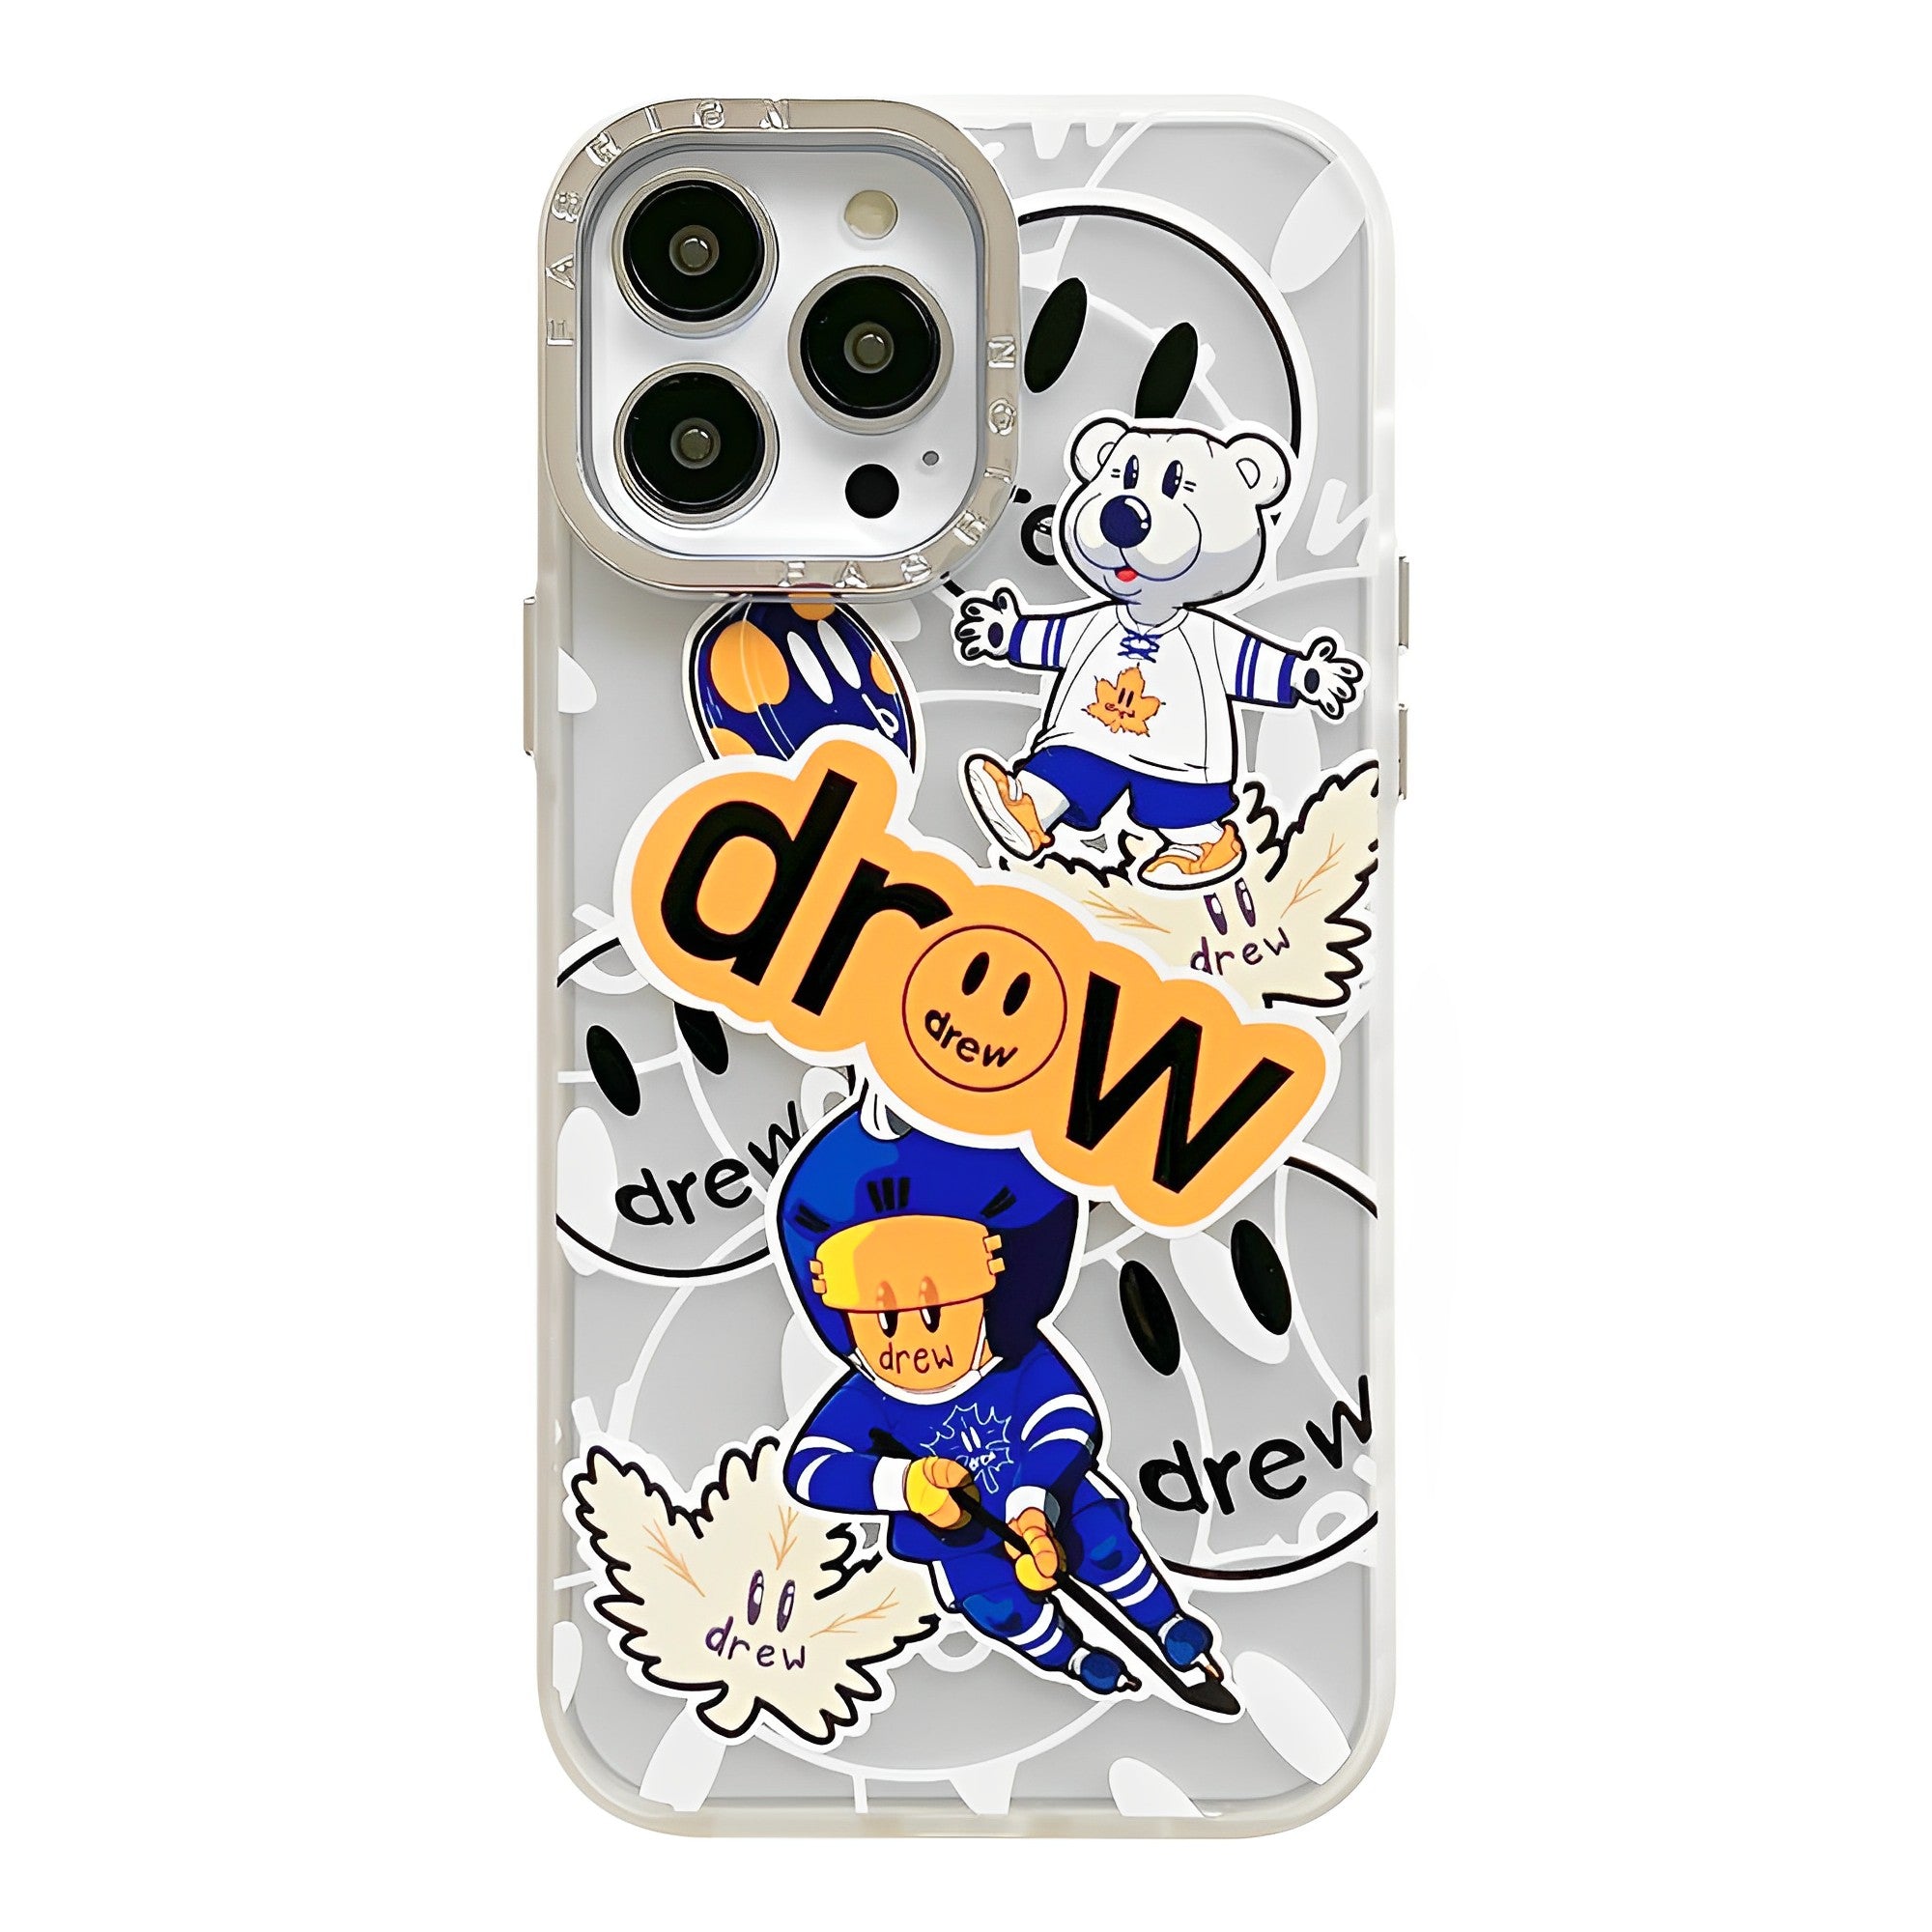 DH iPhone Case